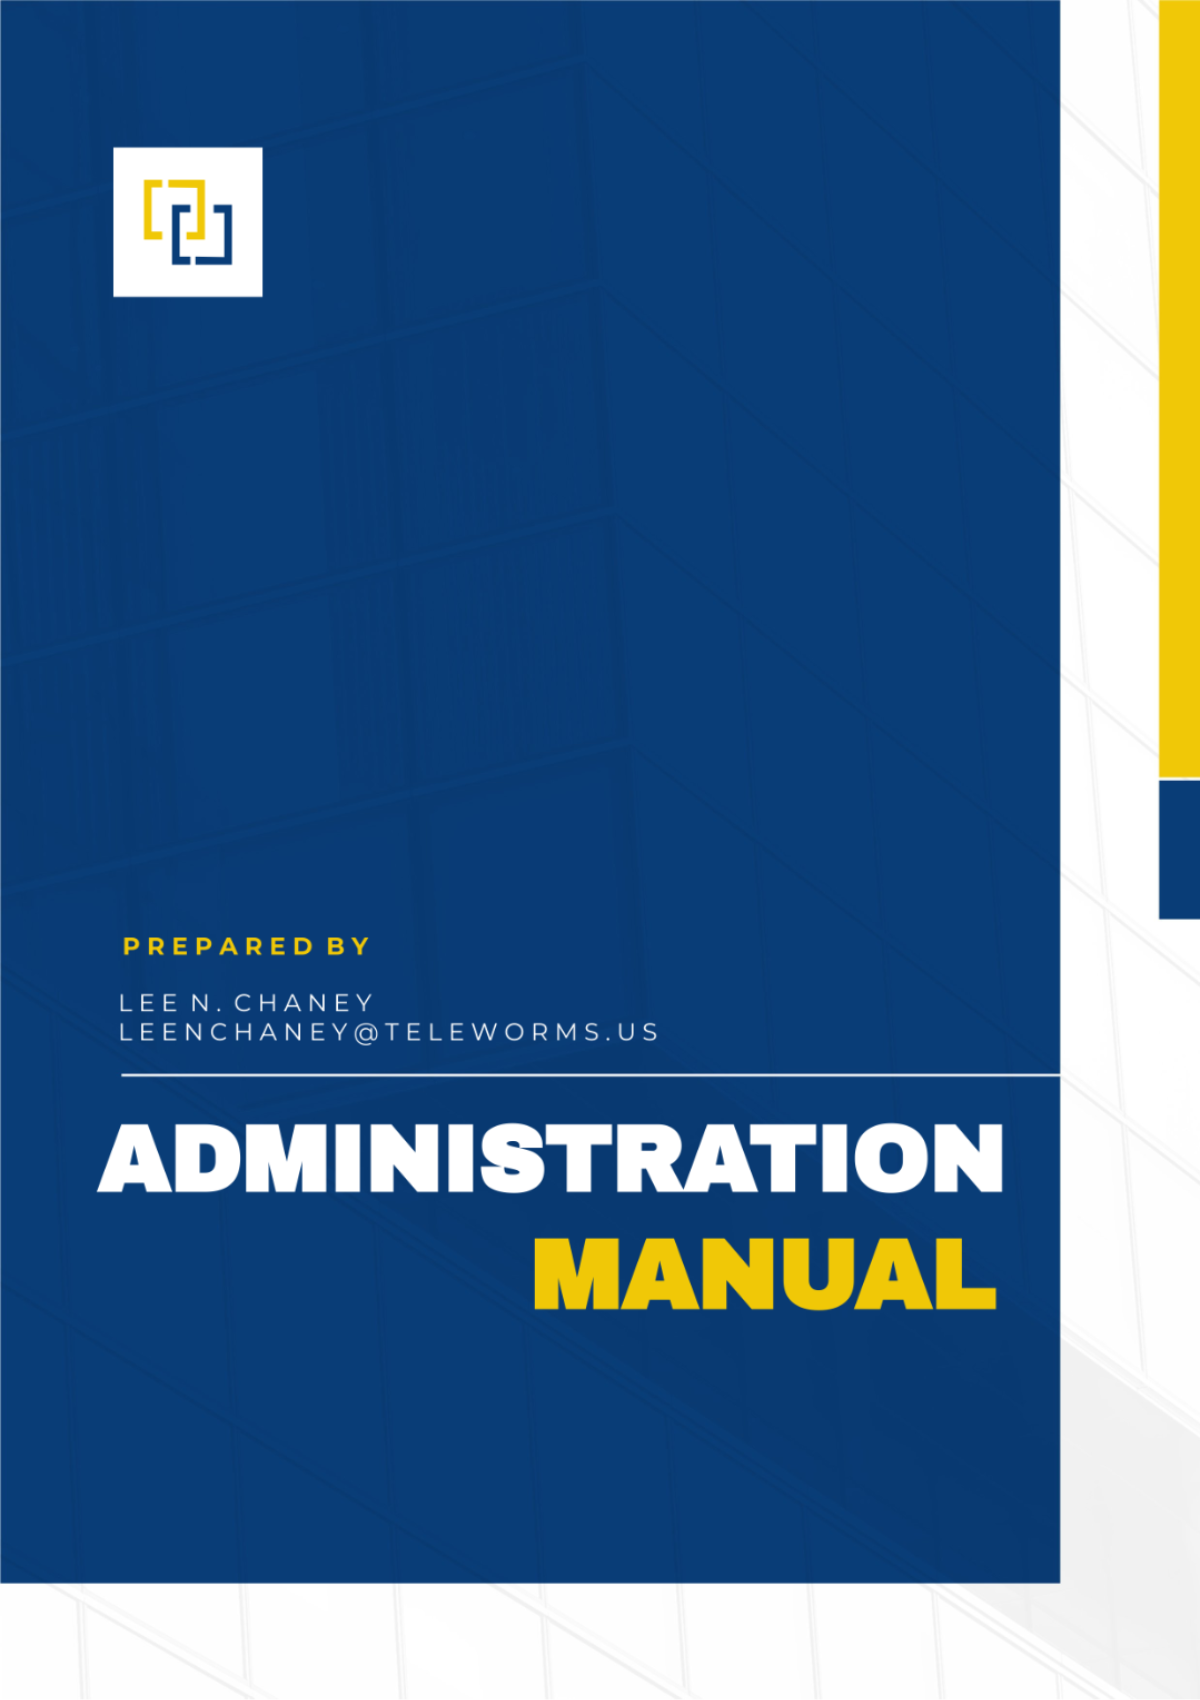 Administration Manual Template